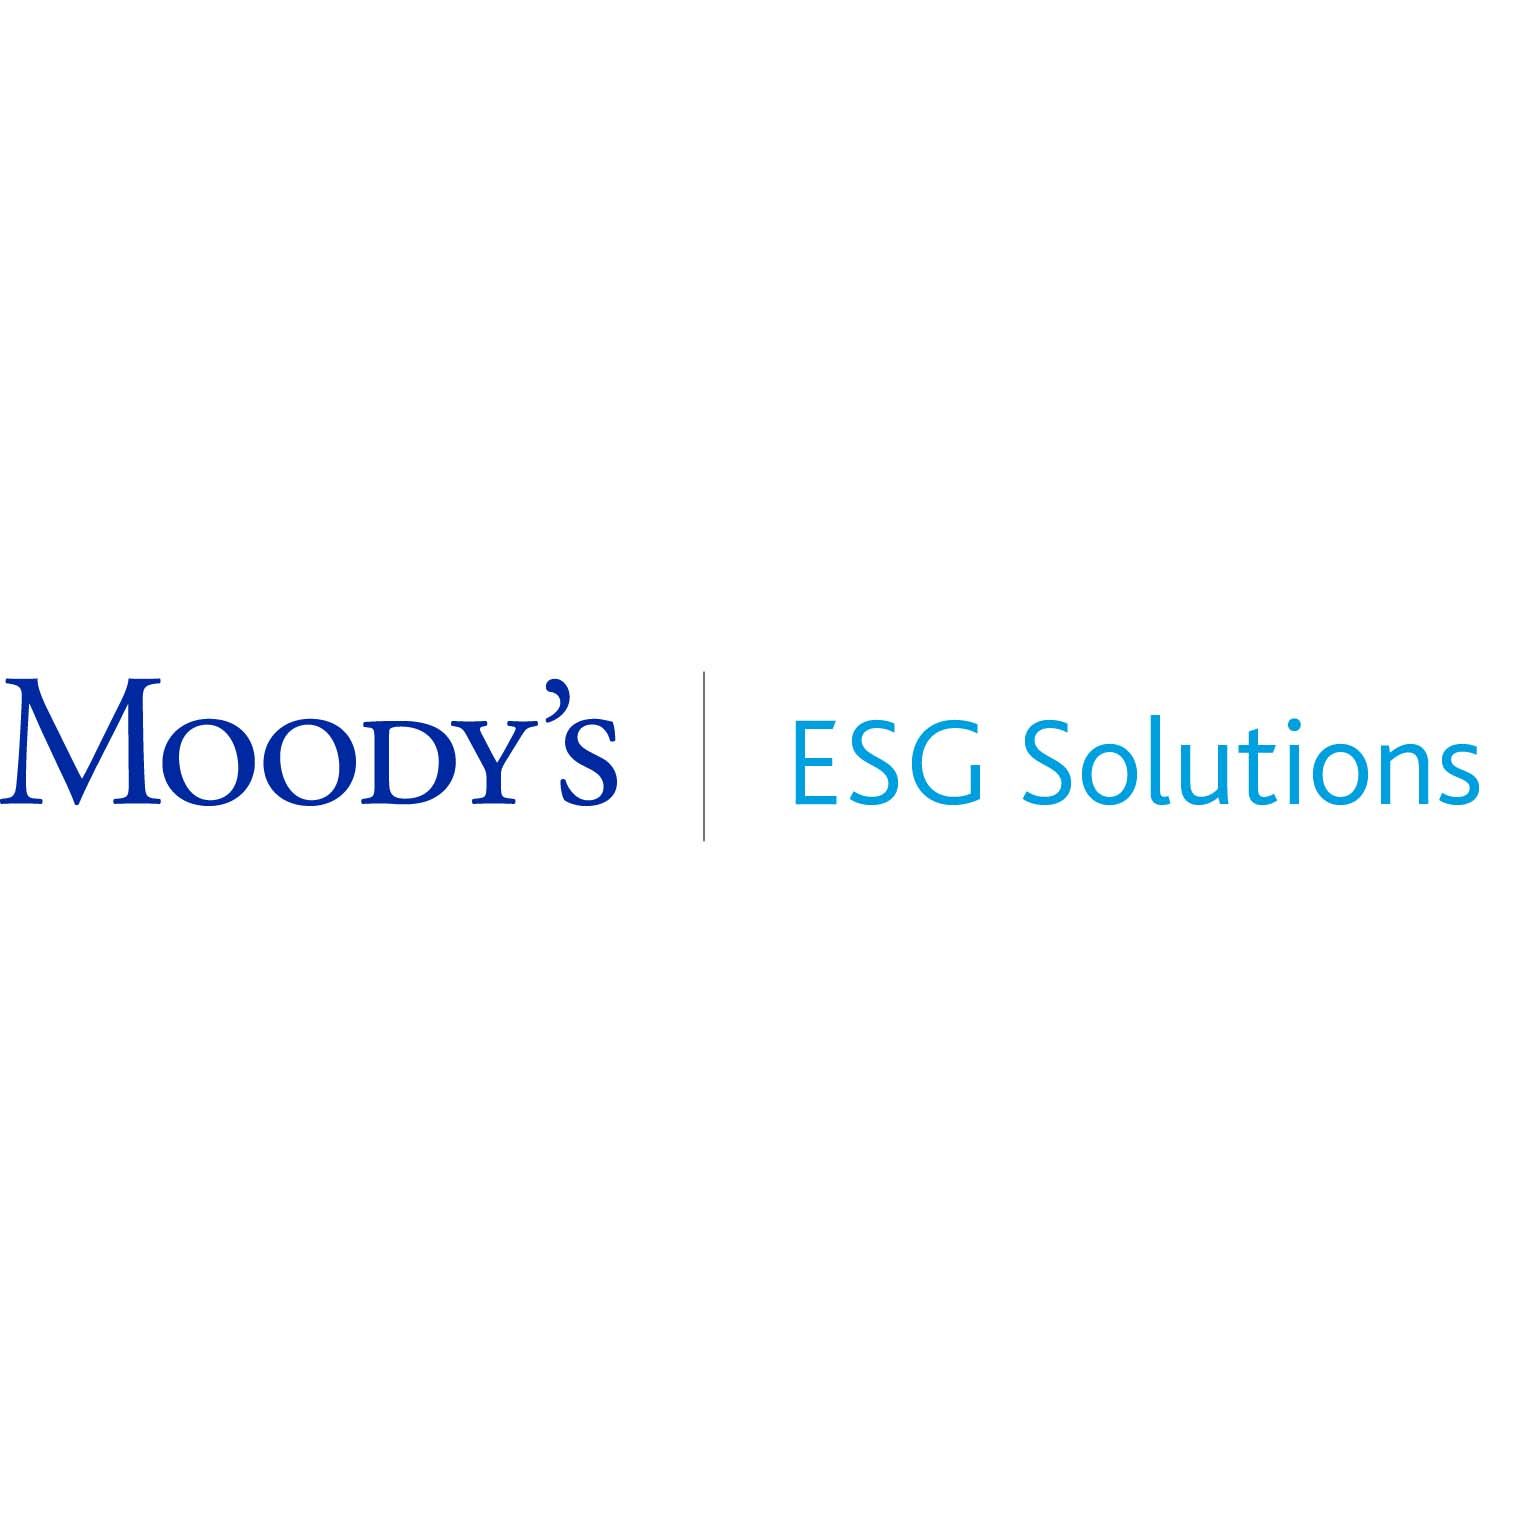 Moody's ESG Solutions - 45 Punkte